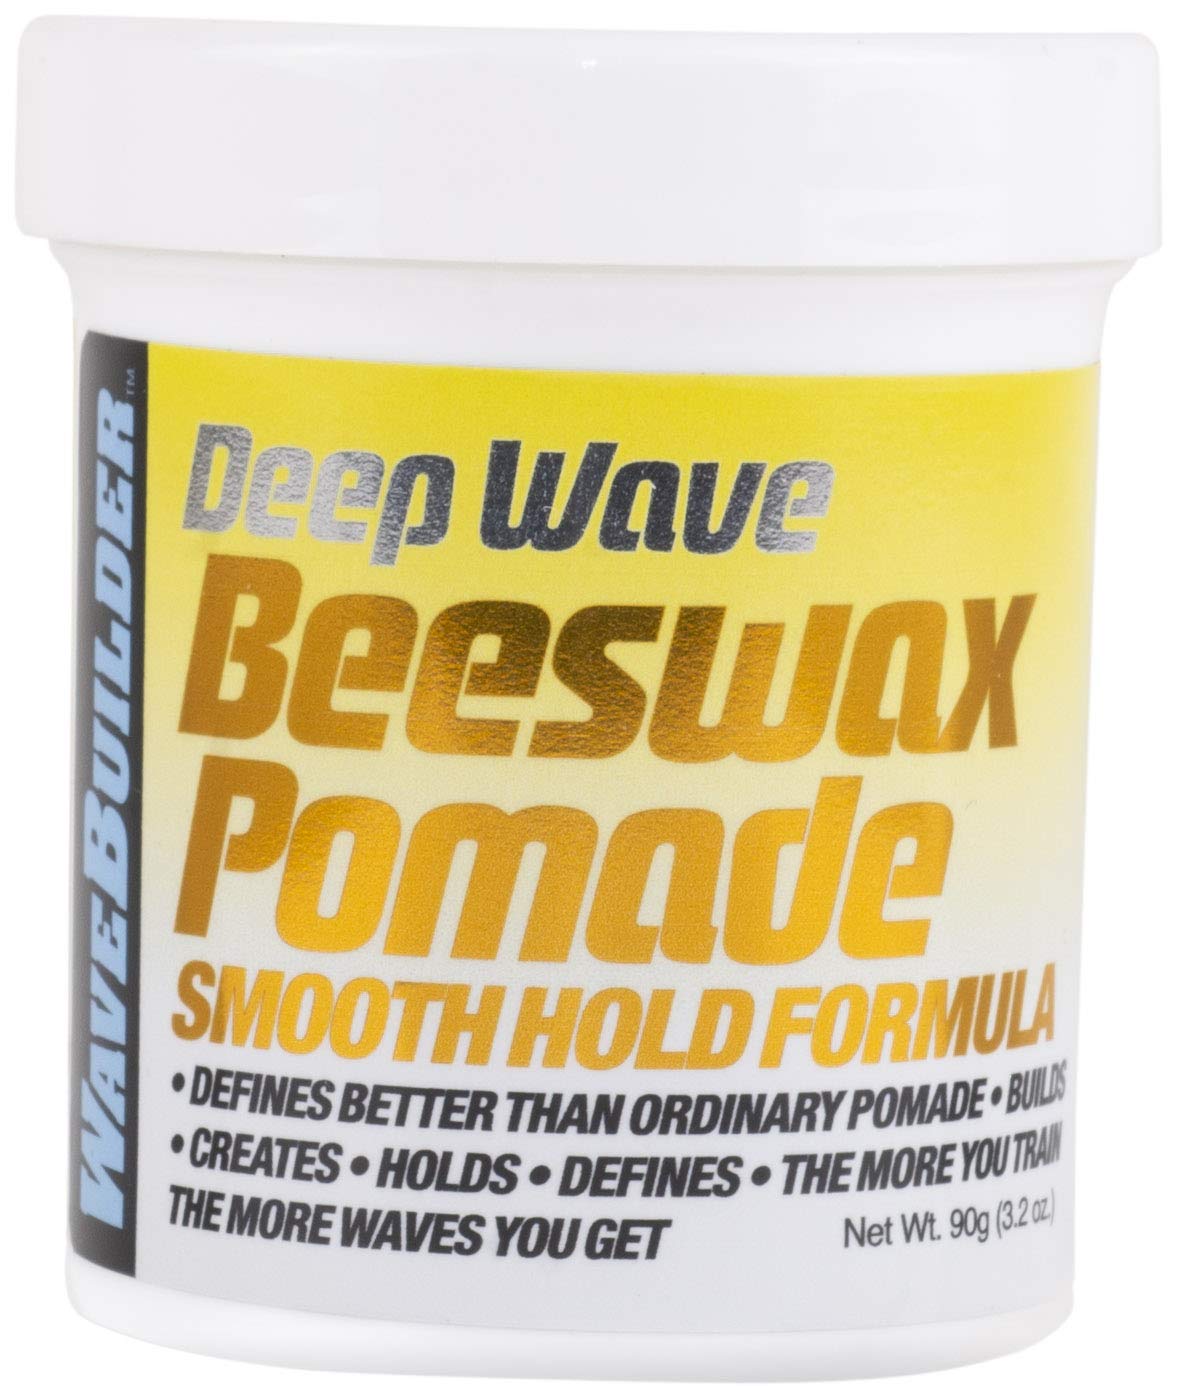 Wave Builder: Deep Wave Beeswax Pomade Smooth Hold Formula